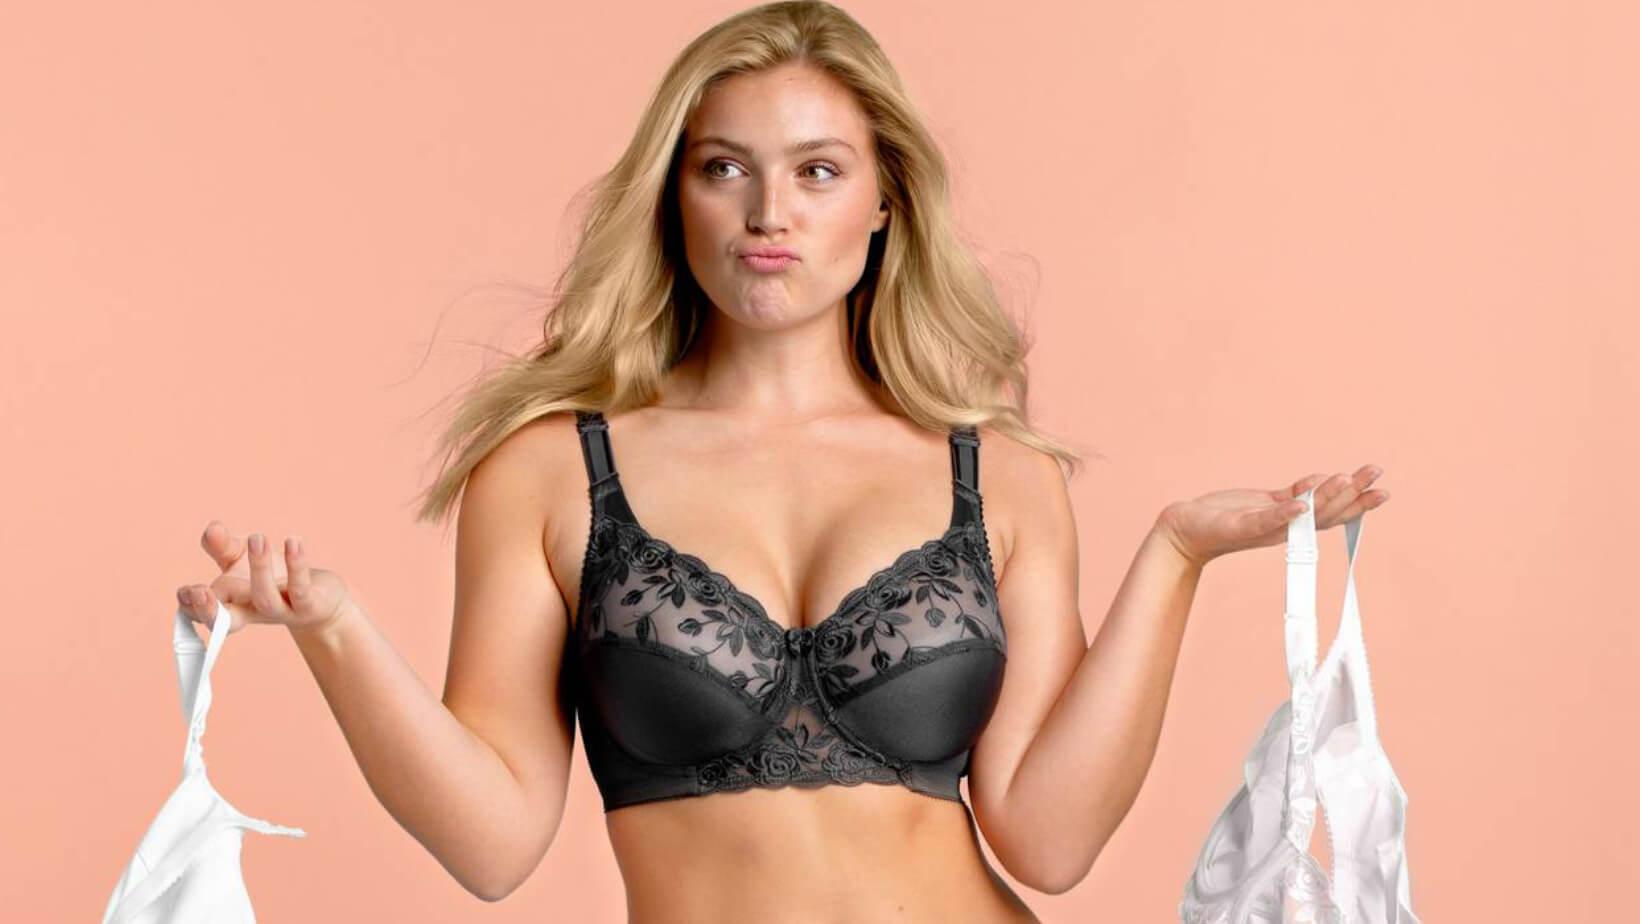 How Many Bras Should I Own? – What Kinds Of Bras Should You Own